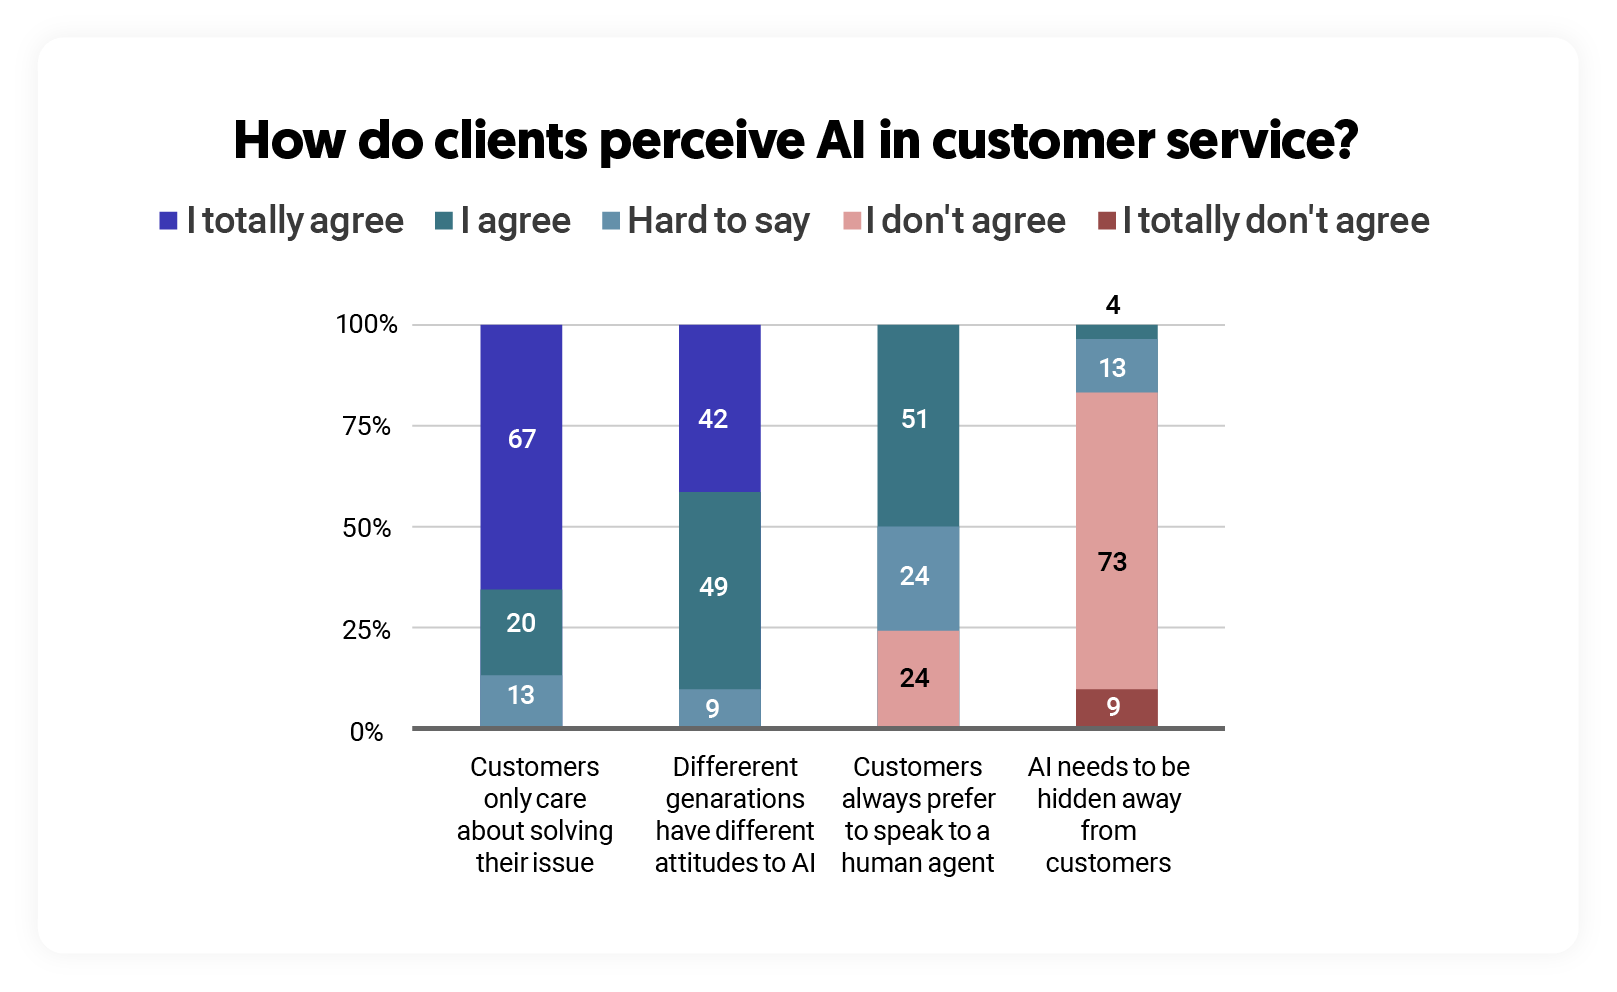 How do clients perceive AI in customer service?